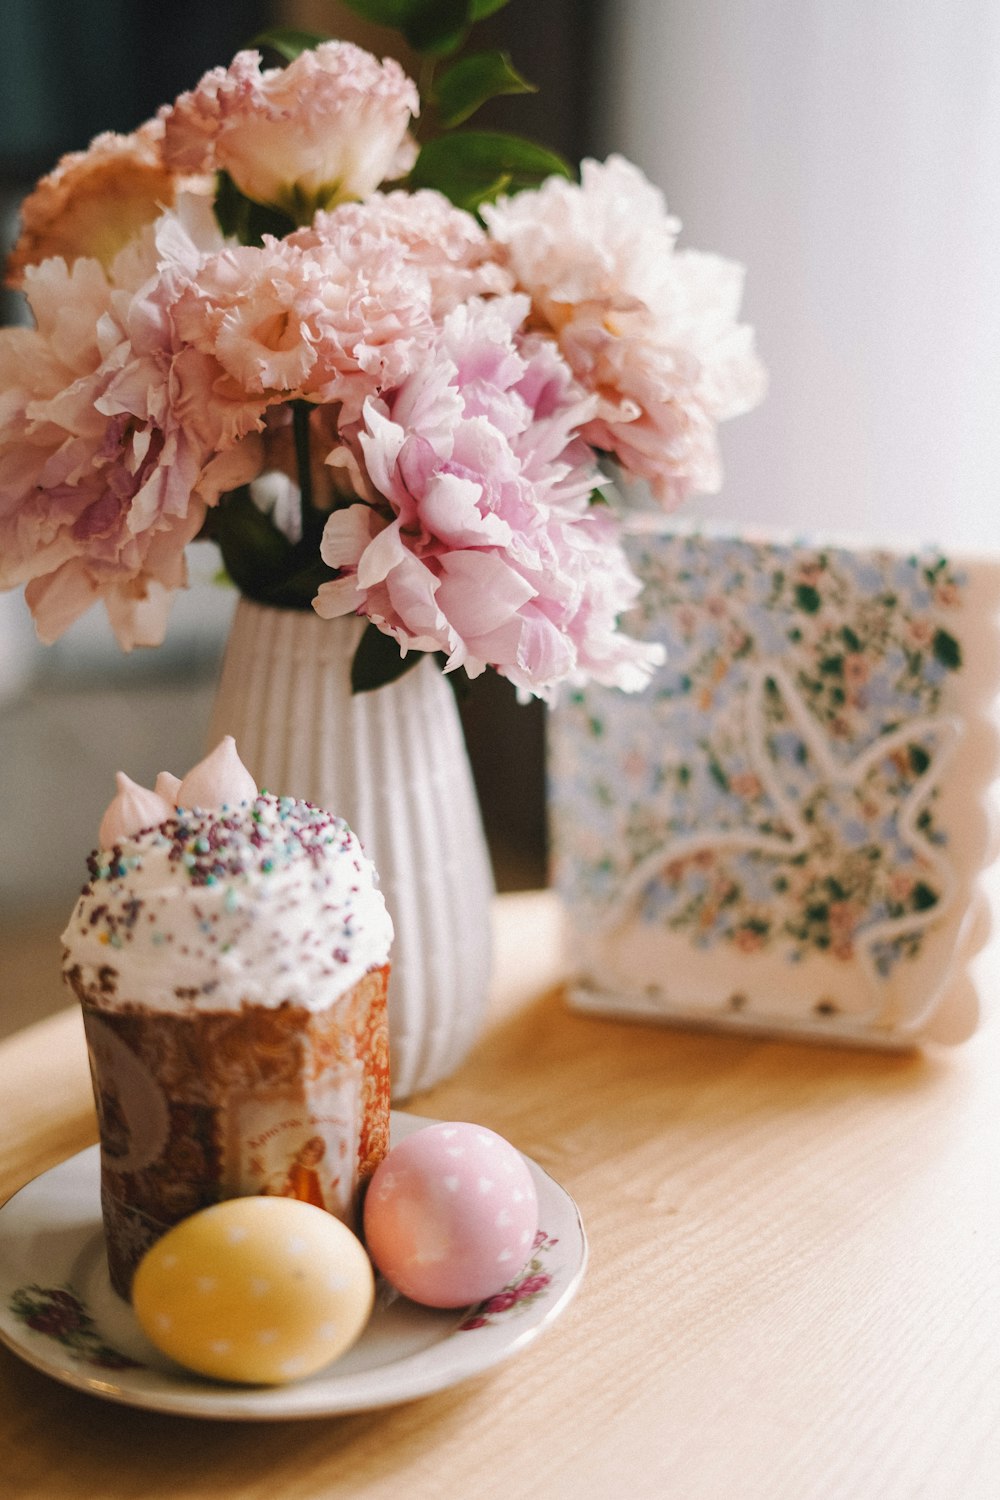 a plate with a cupcake on it next to a vase with flowers